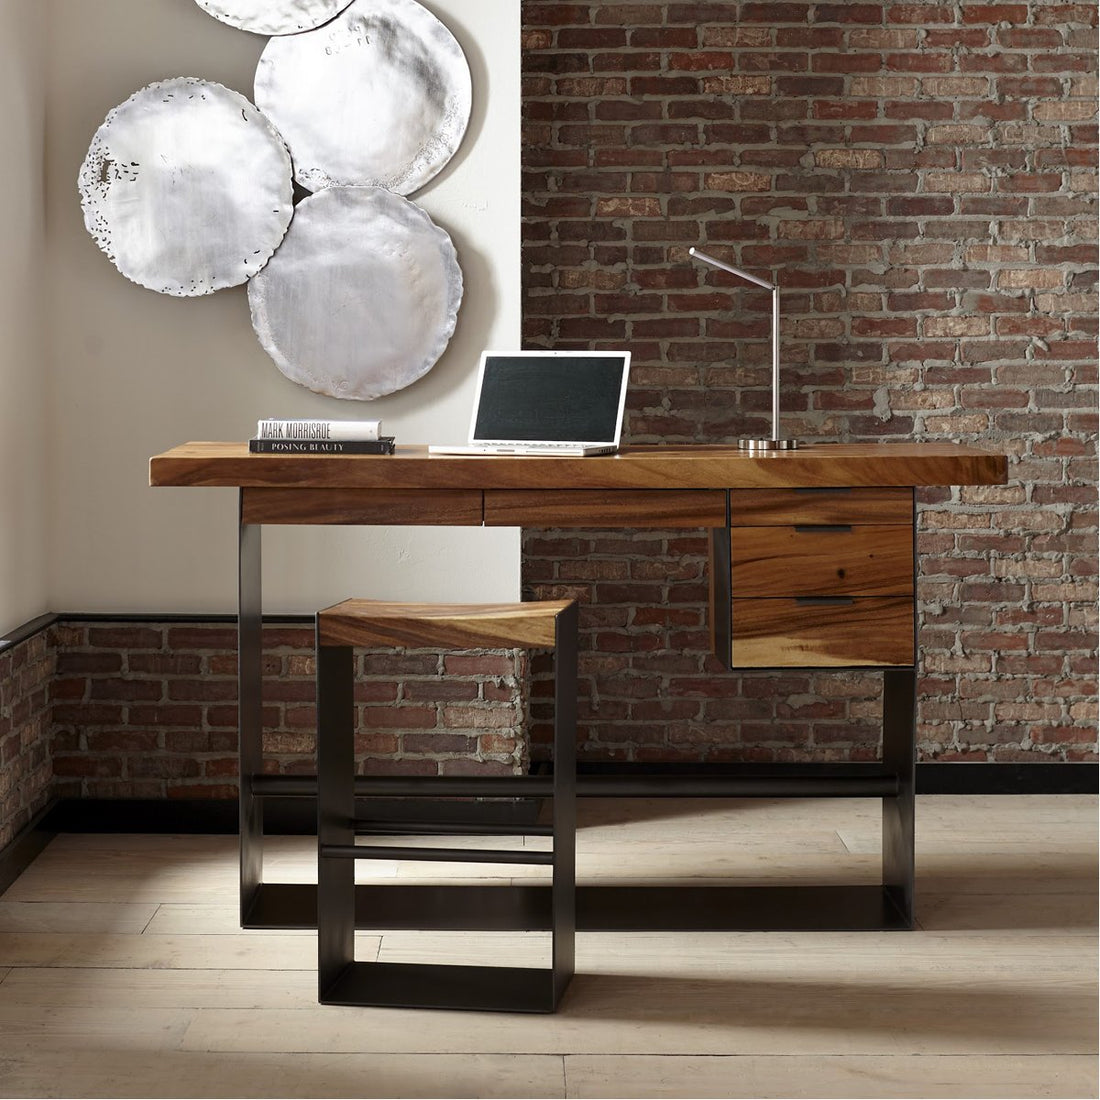 Phillips Collection Iron Frame Standing Desk with Drawers